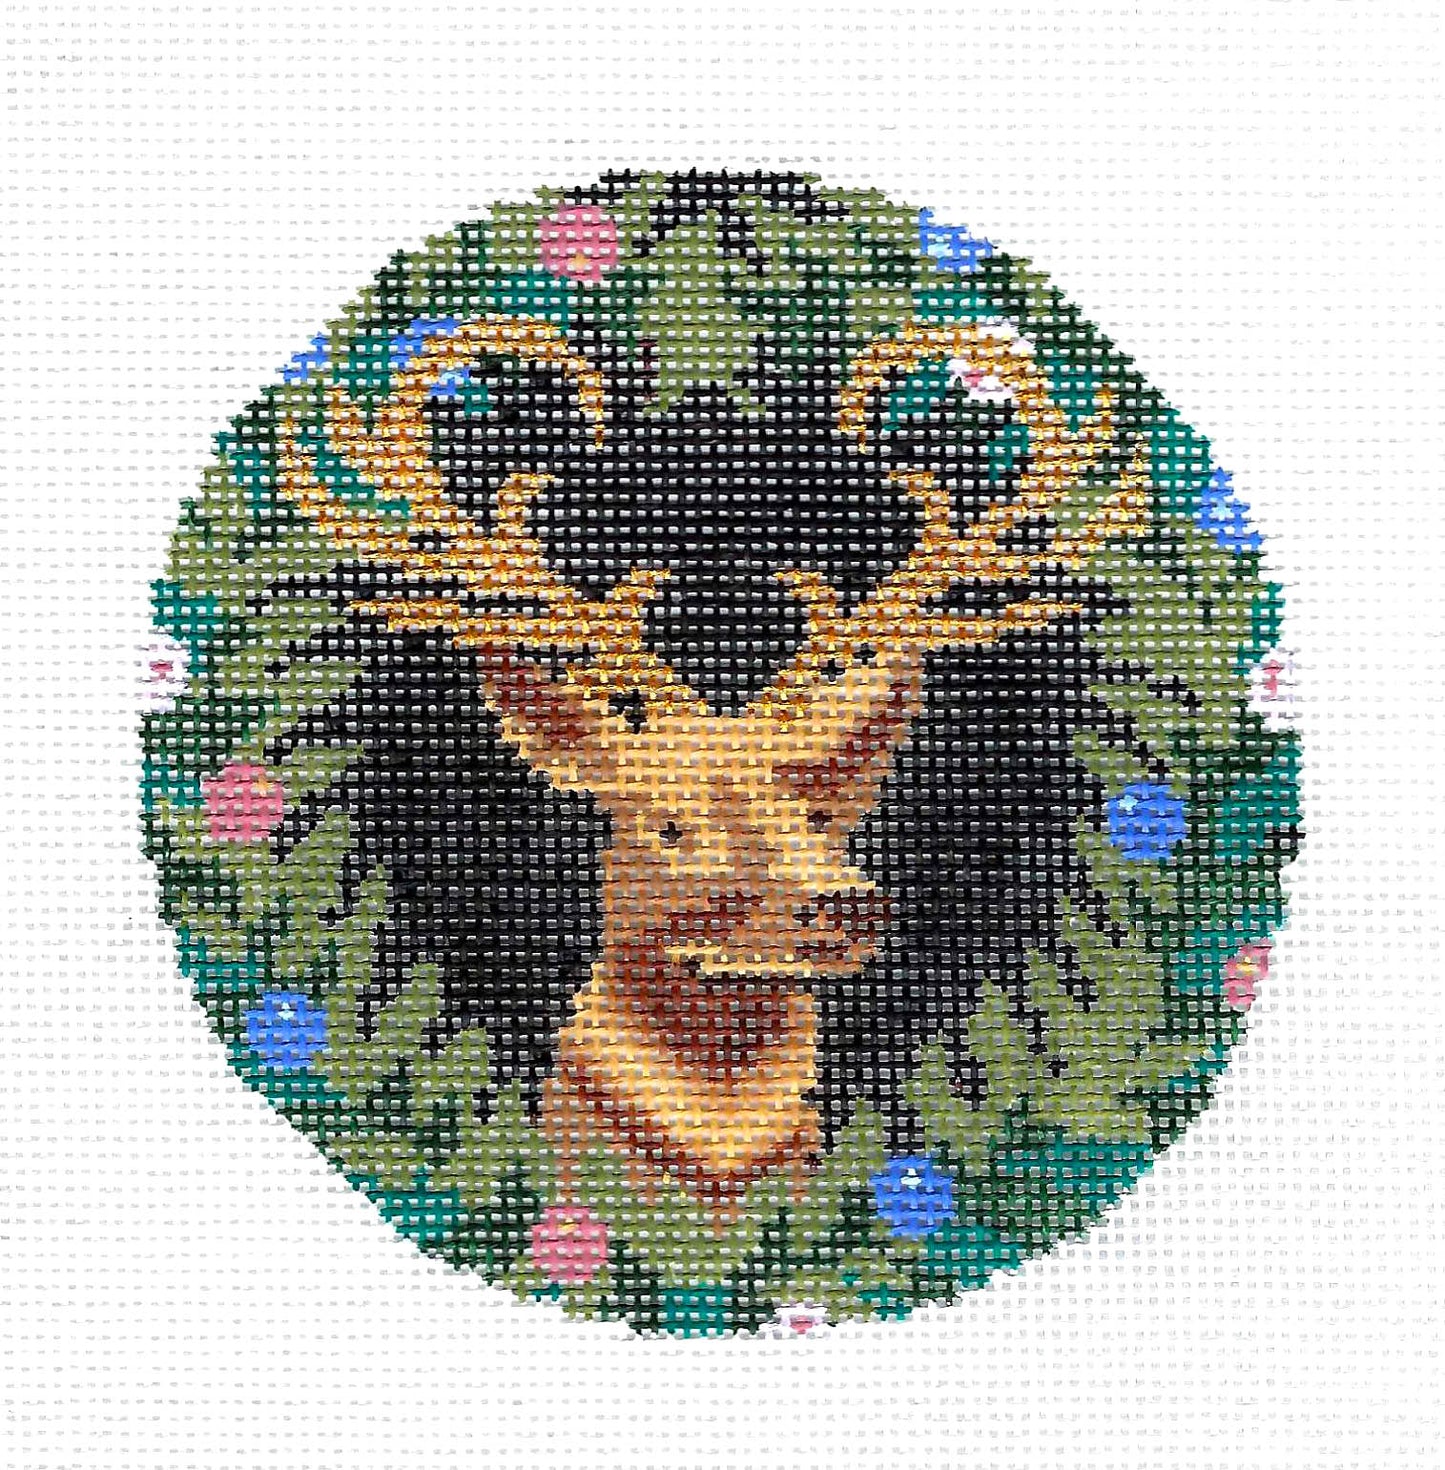 Christmas Royal Stag in Wreath Ornament handpainted Needlepoint Canvas by Abigail Cecile